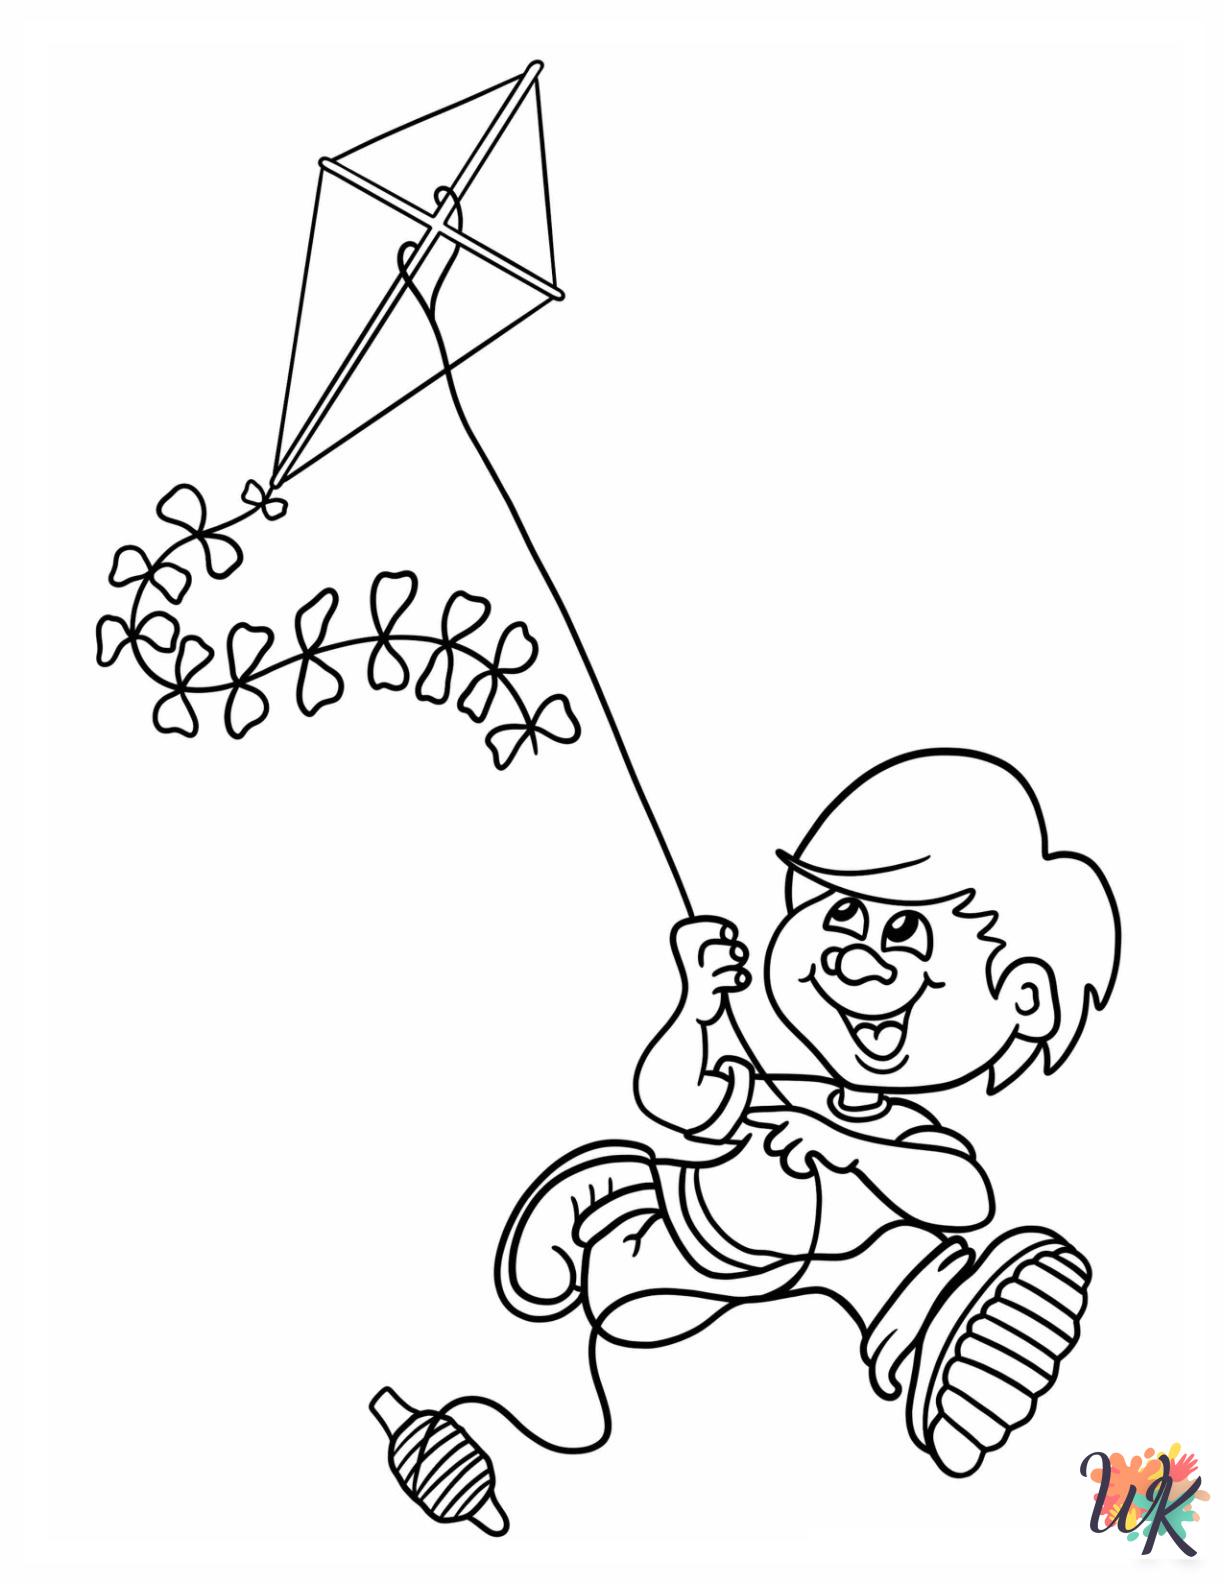 Kite Coloring Pages 16